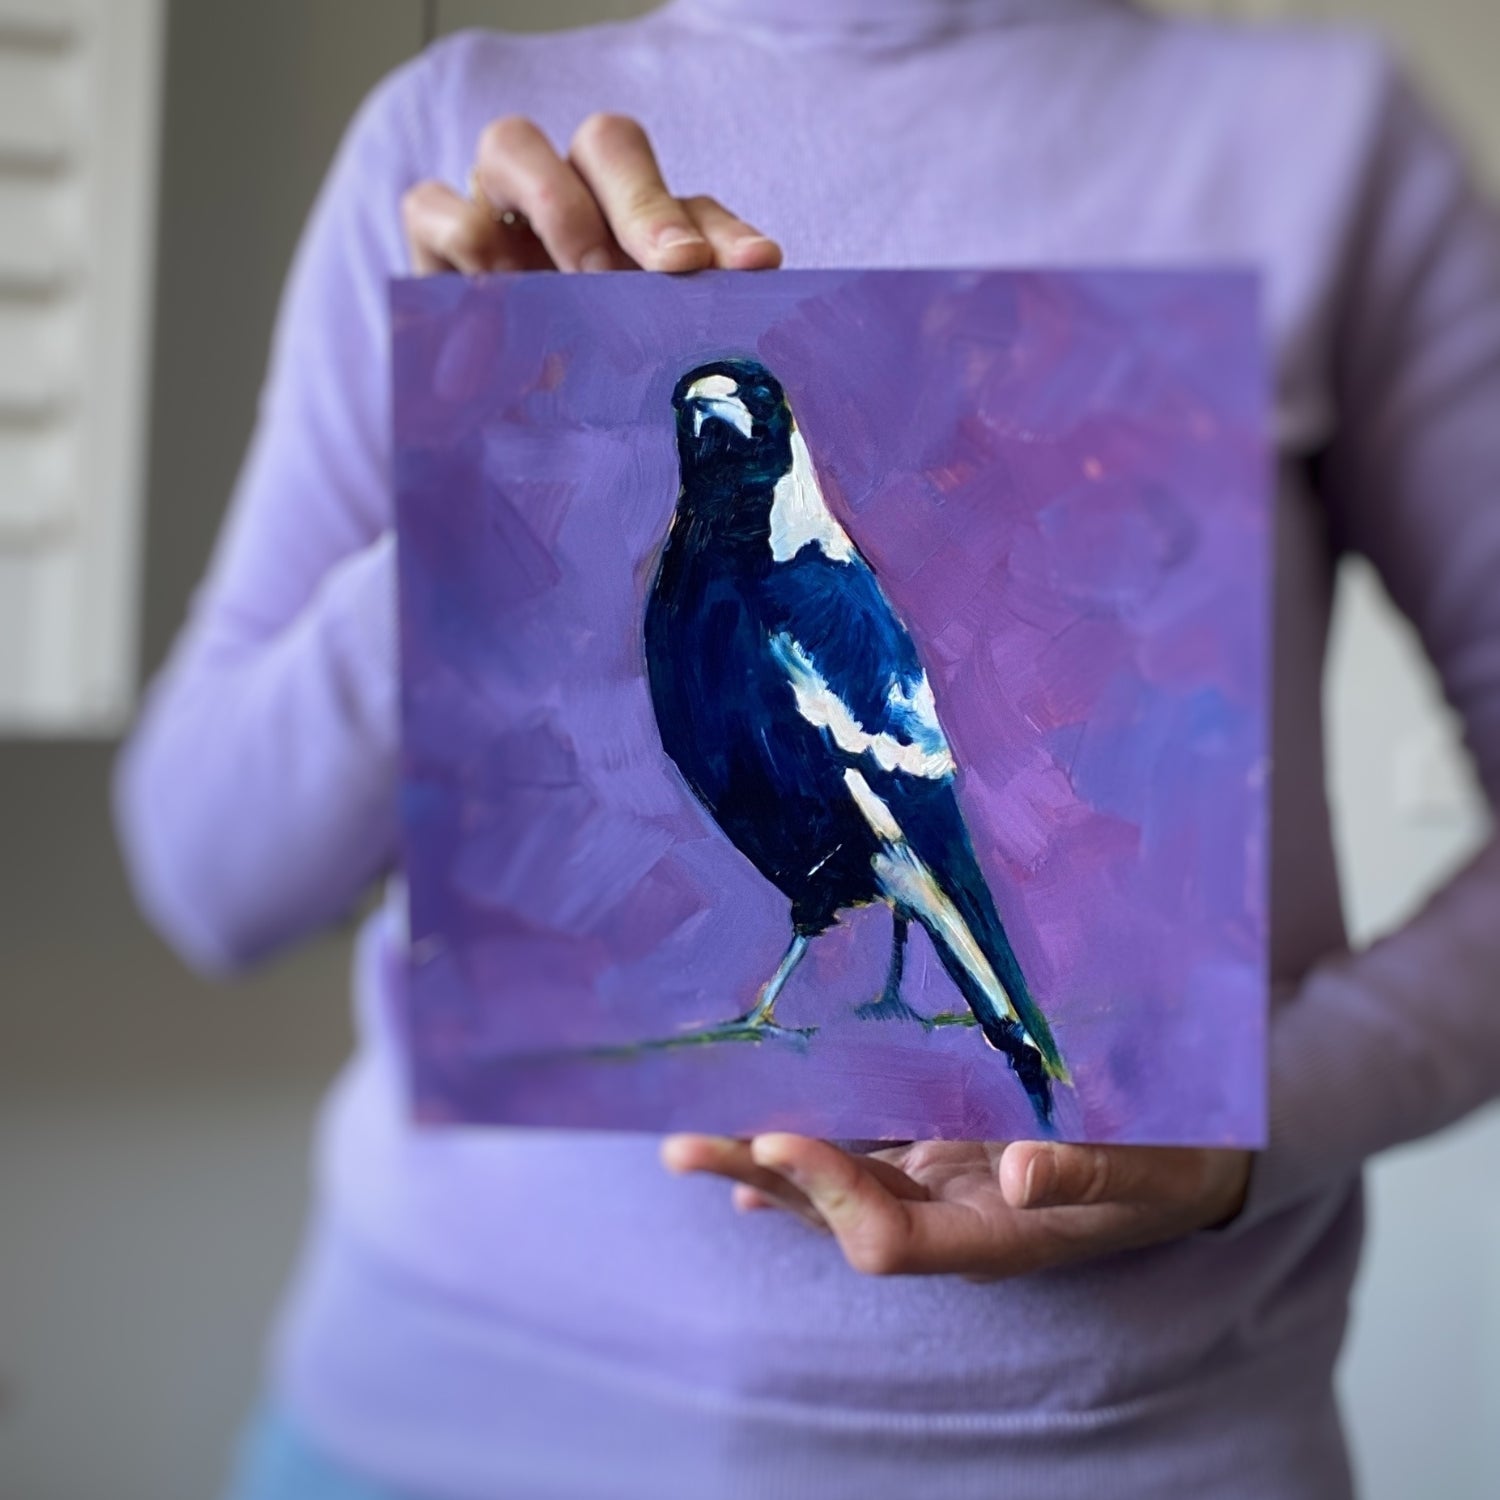 lifestyle photo of a person holding an original painting of a navy blue and white magpie with its head tilted on a bright and textured purple with bits of blue background.